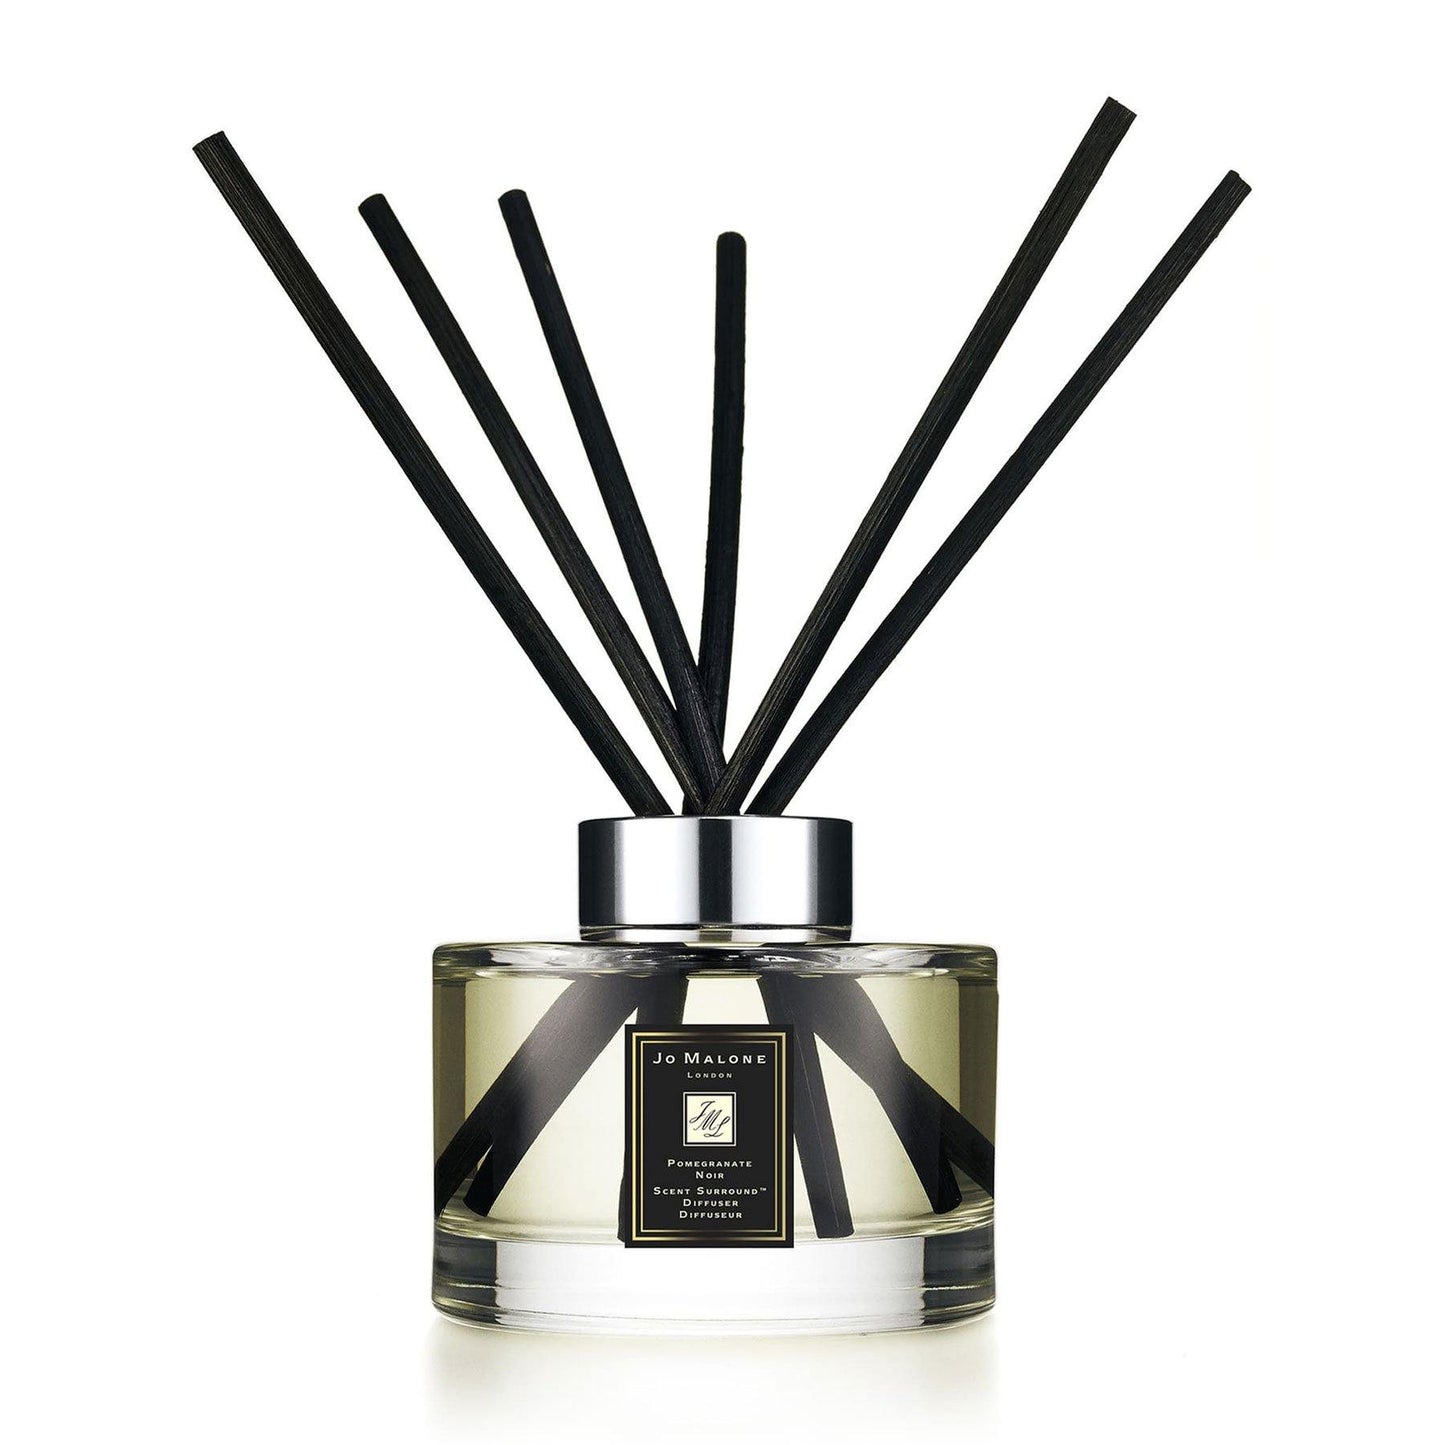 Pomegranate Noir Diffuser - Cosmos Boutique New Jersey